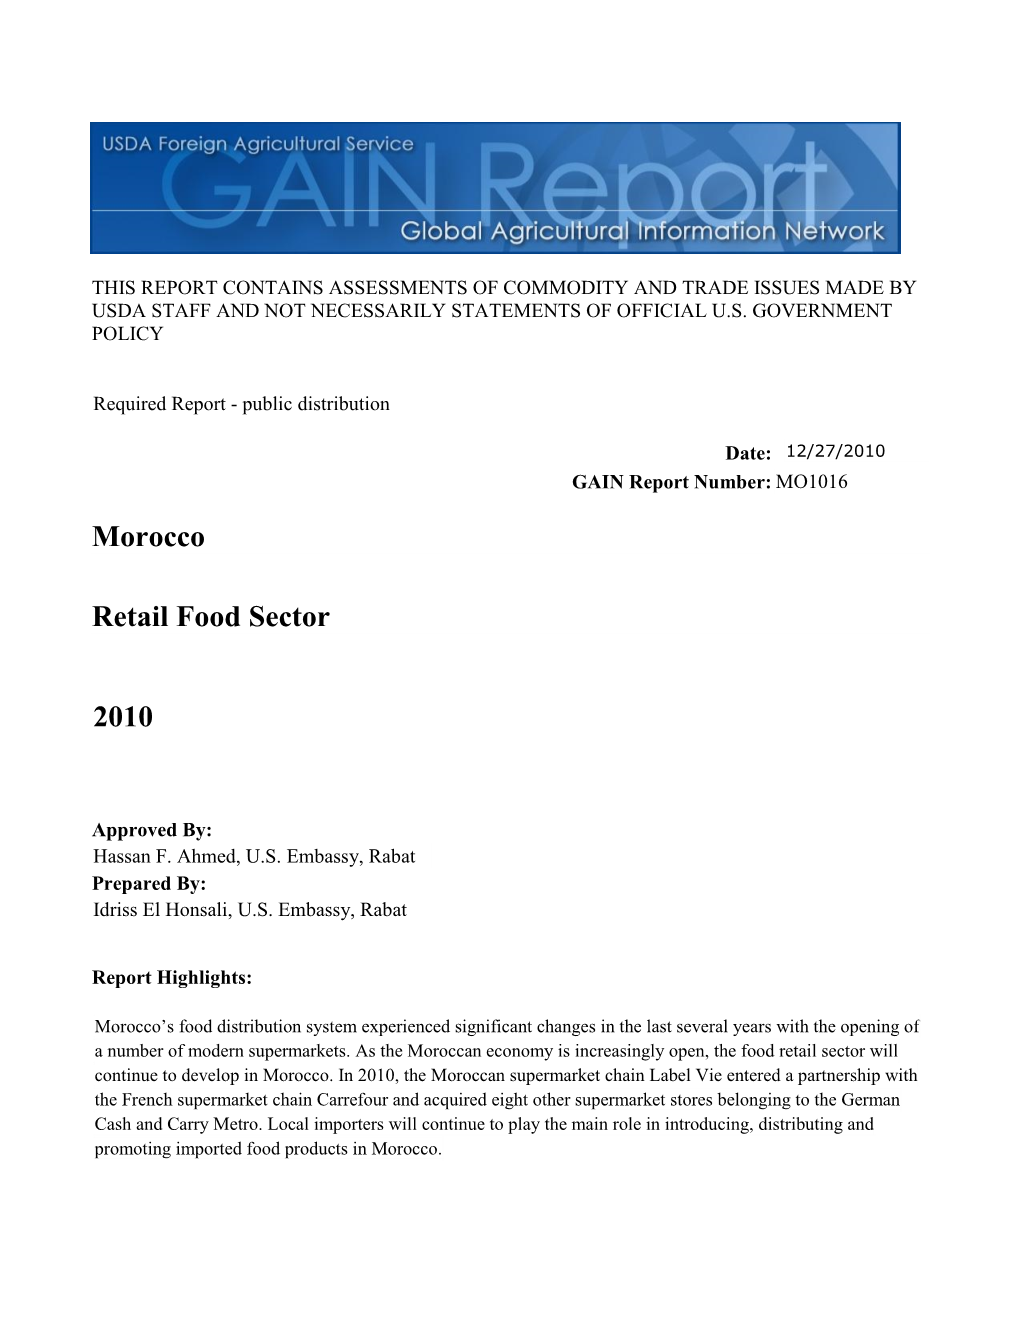 2010 Retail Food Sector Morocco